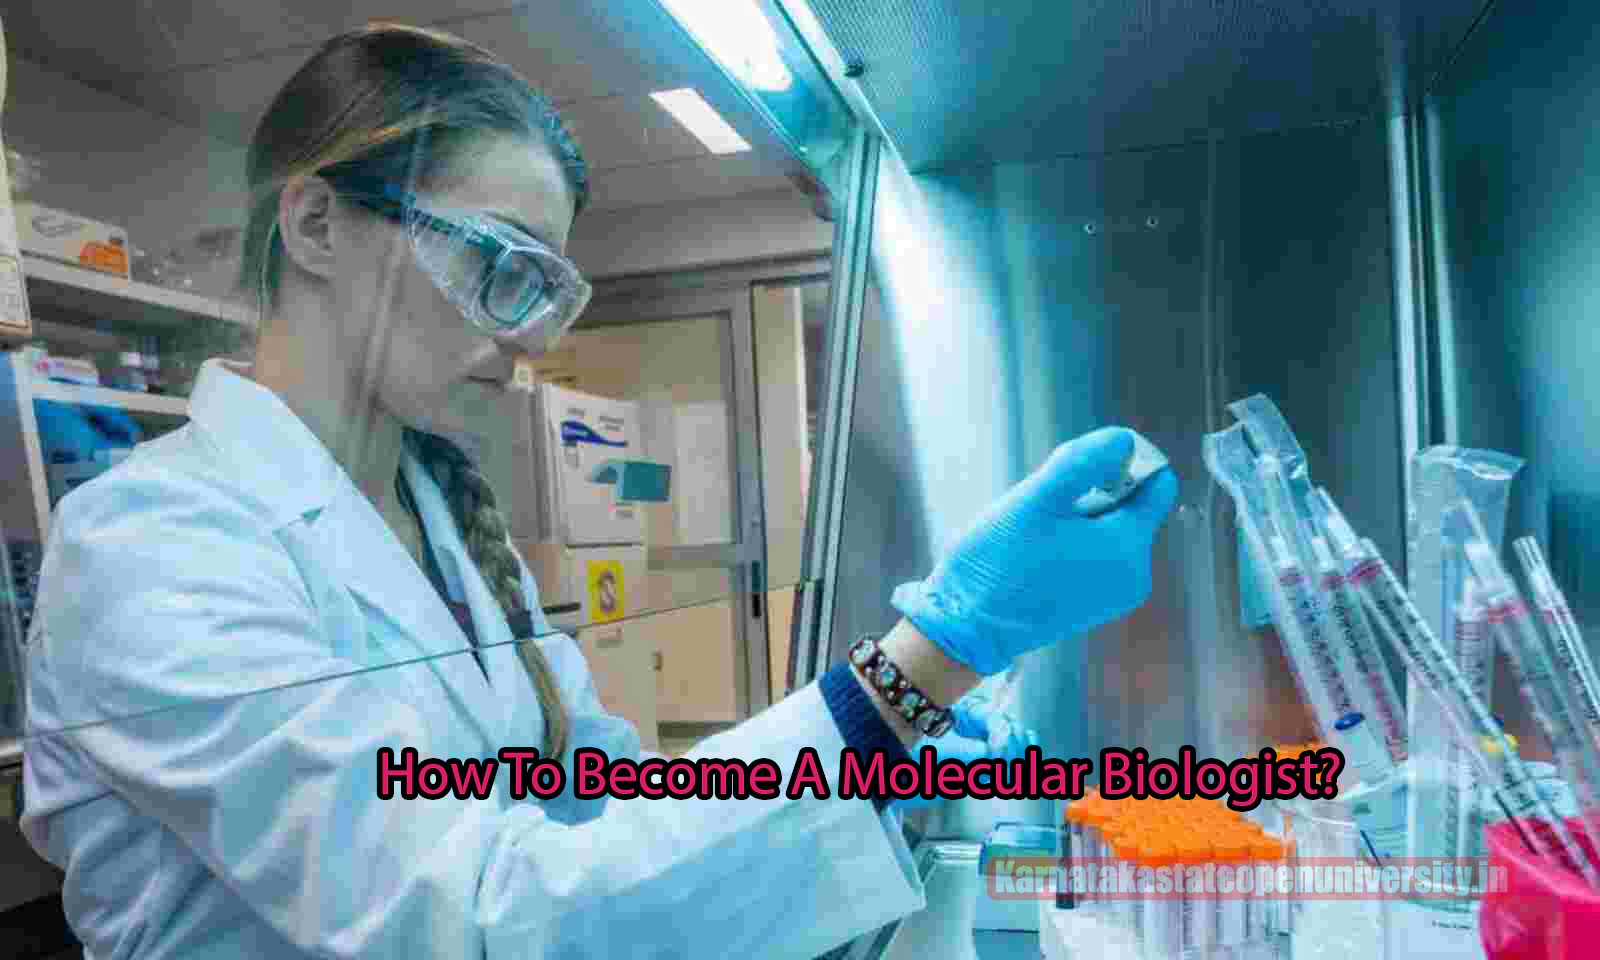 How To Become A Molecular Biologist?